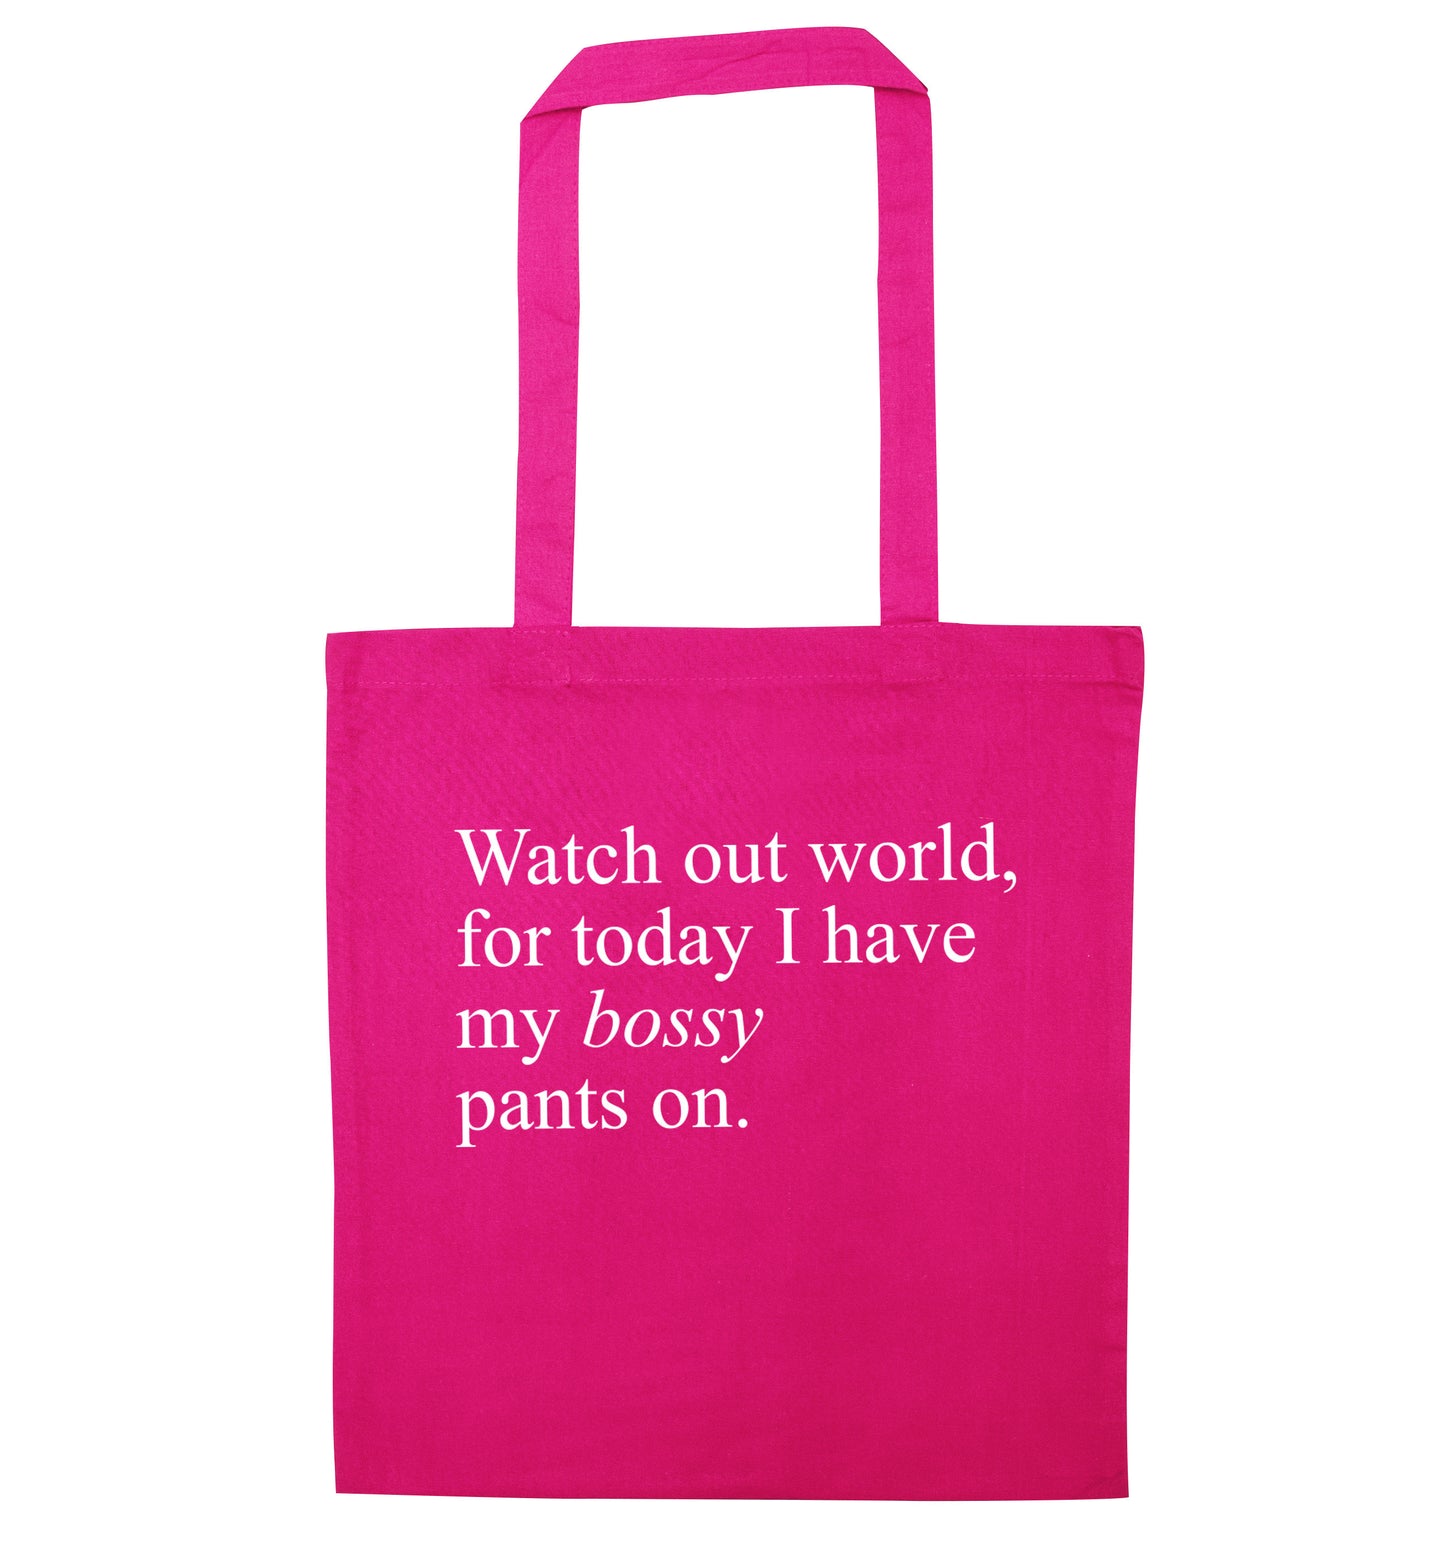 Watch out world, for today I have my bossy pants on pink tote bag